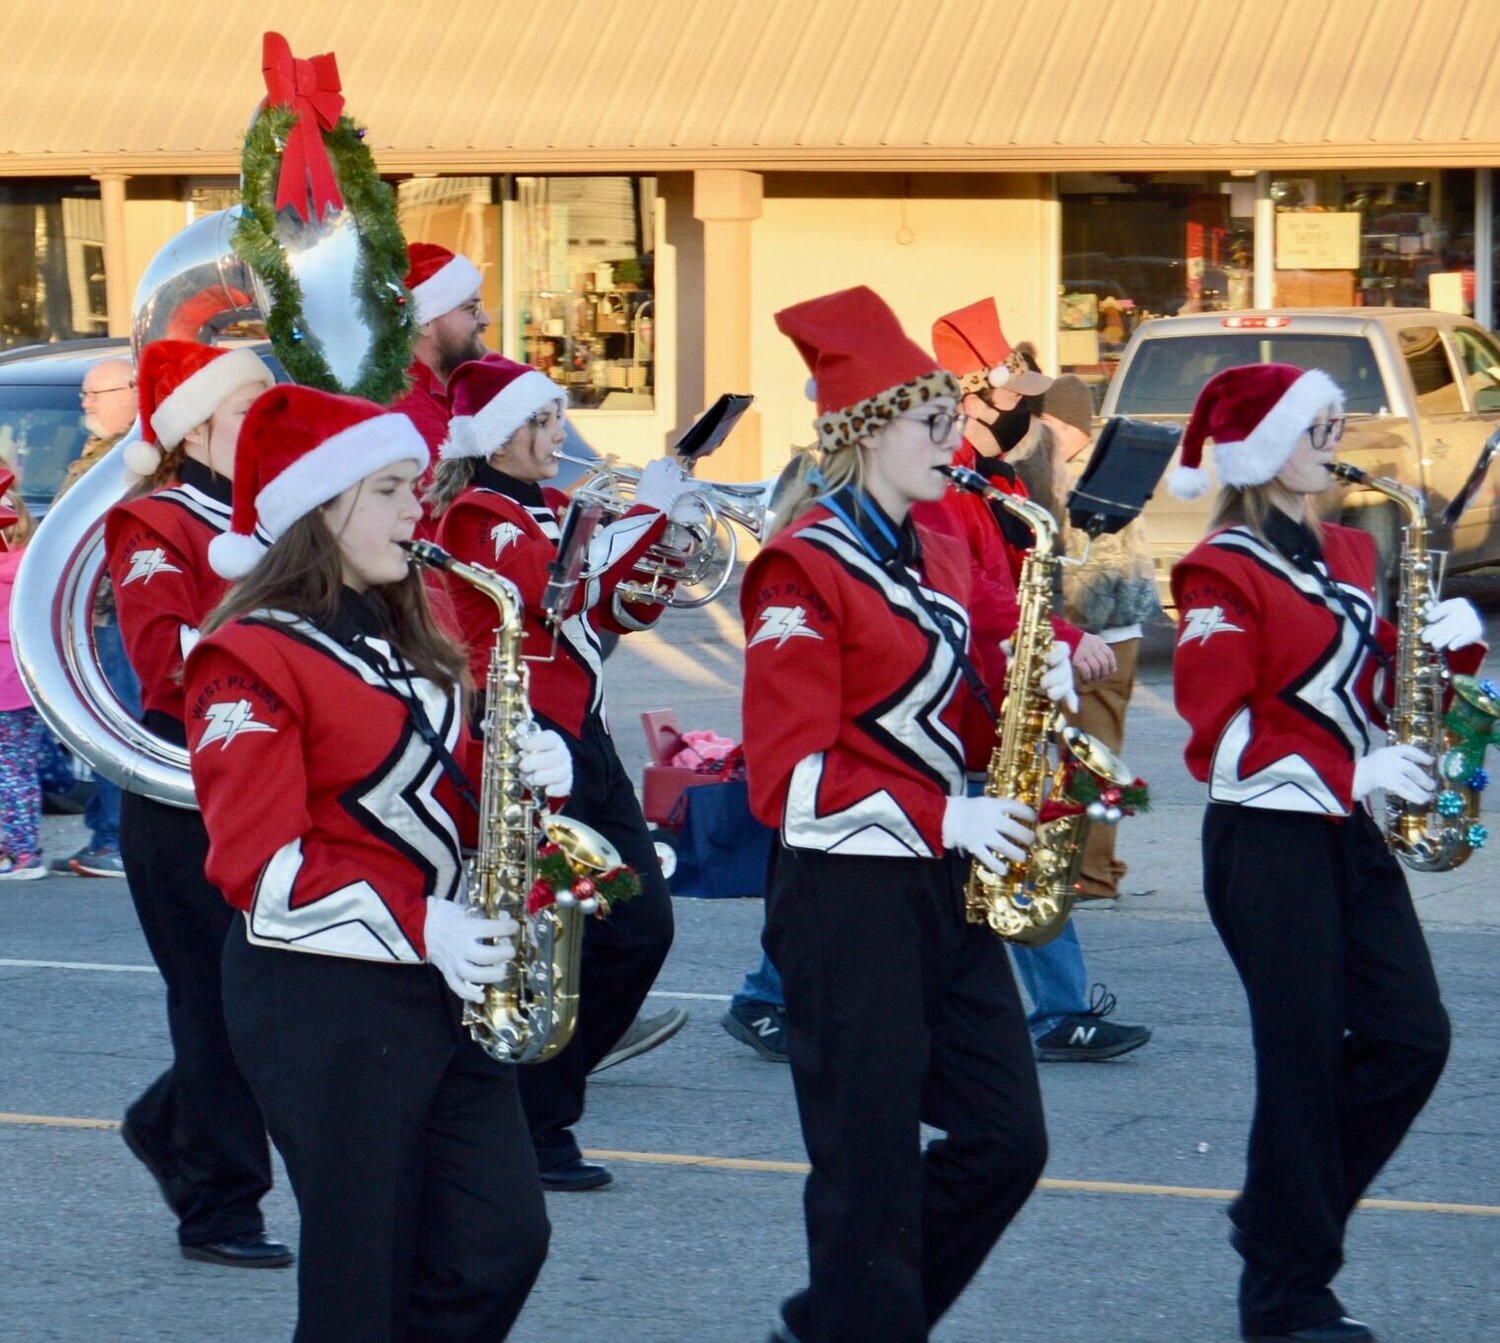 The Zizzer Pride Band, shown here in last year's West Plains Christmas Parade, routinely makes an appearance in the annual festivities. Saturday's parade comes ahead of Monday's free All Bands Concert, beginning at 7 p.m. at the West Plains Civic Center, 110 St. Louis St. Donations for the R-7 Bridges program will be accepted at the door. More details about the concert will be published in Saturday's Gazette.